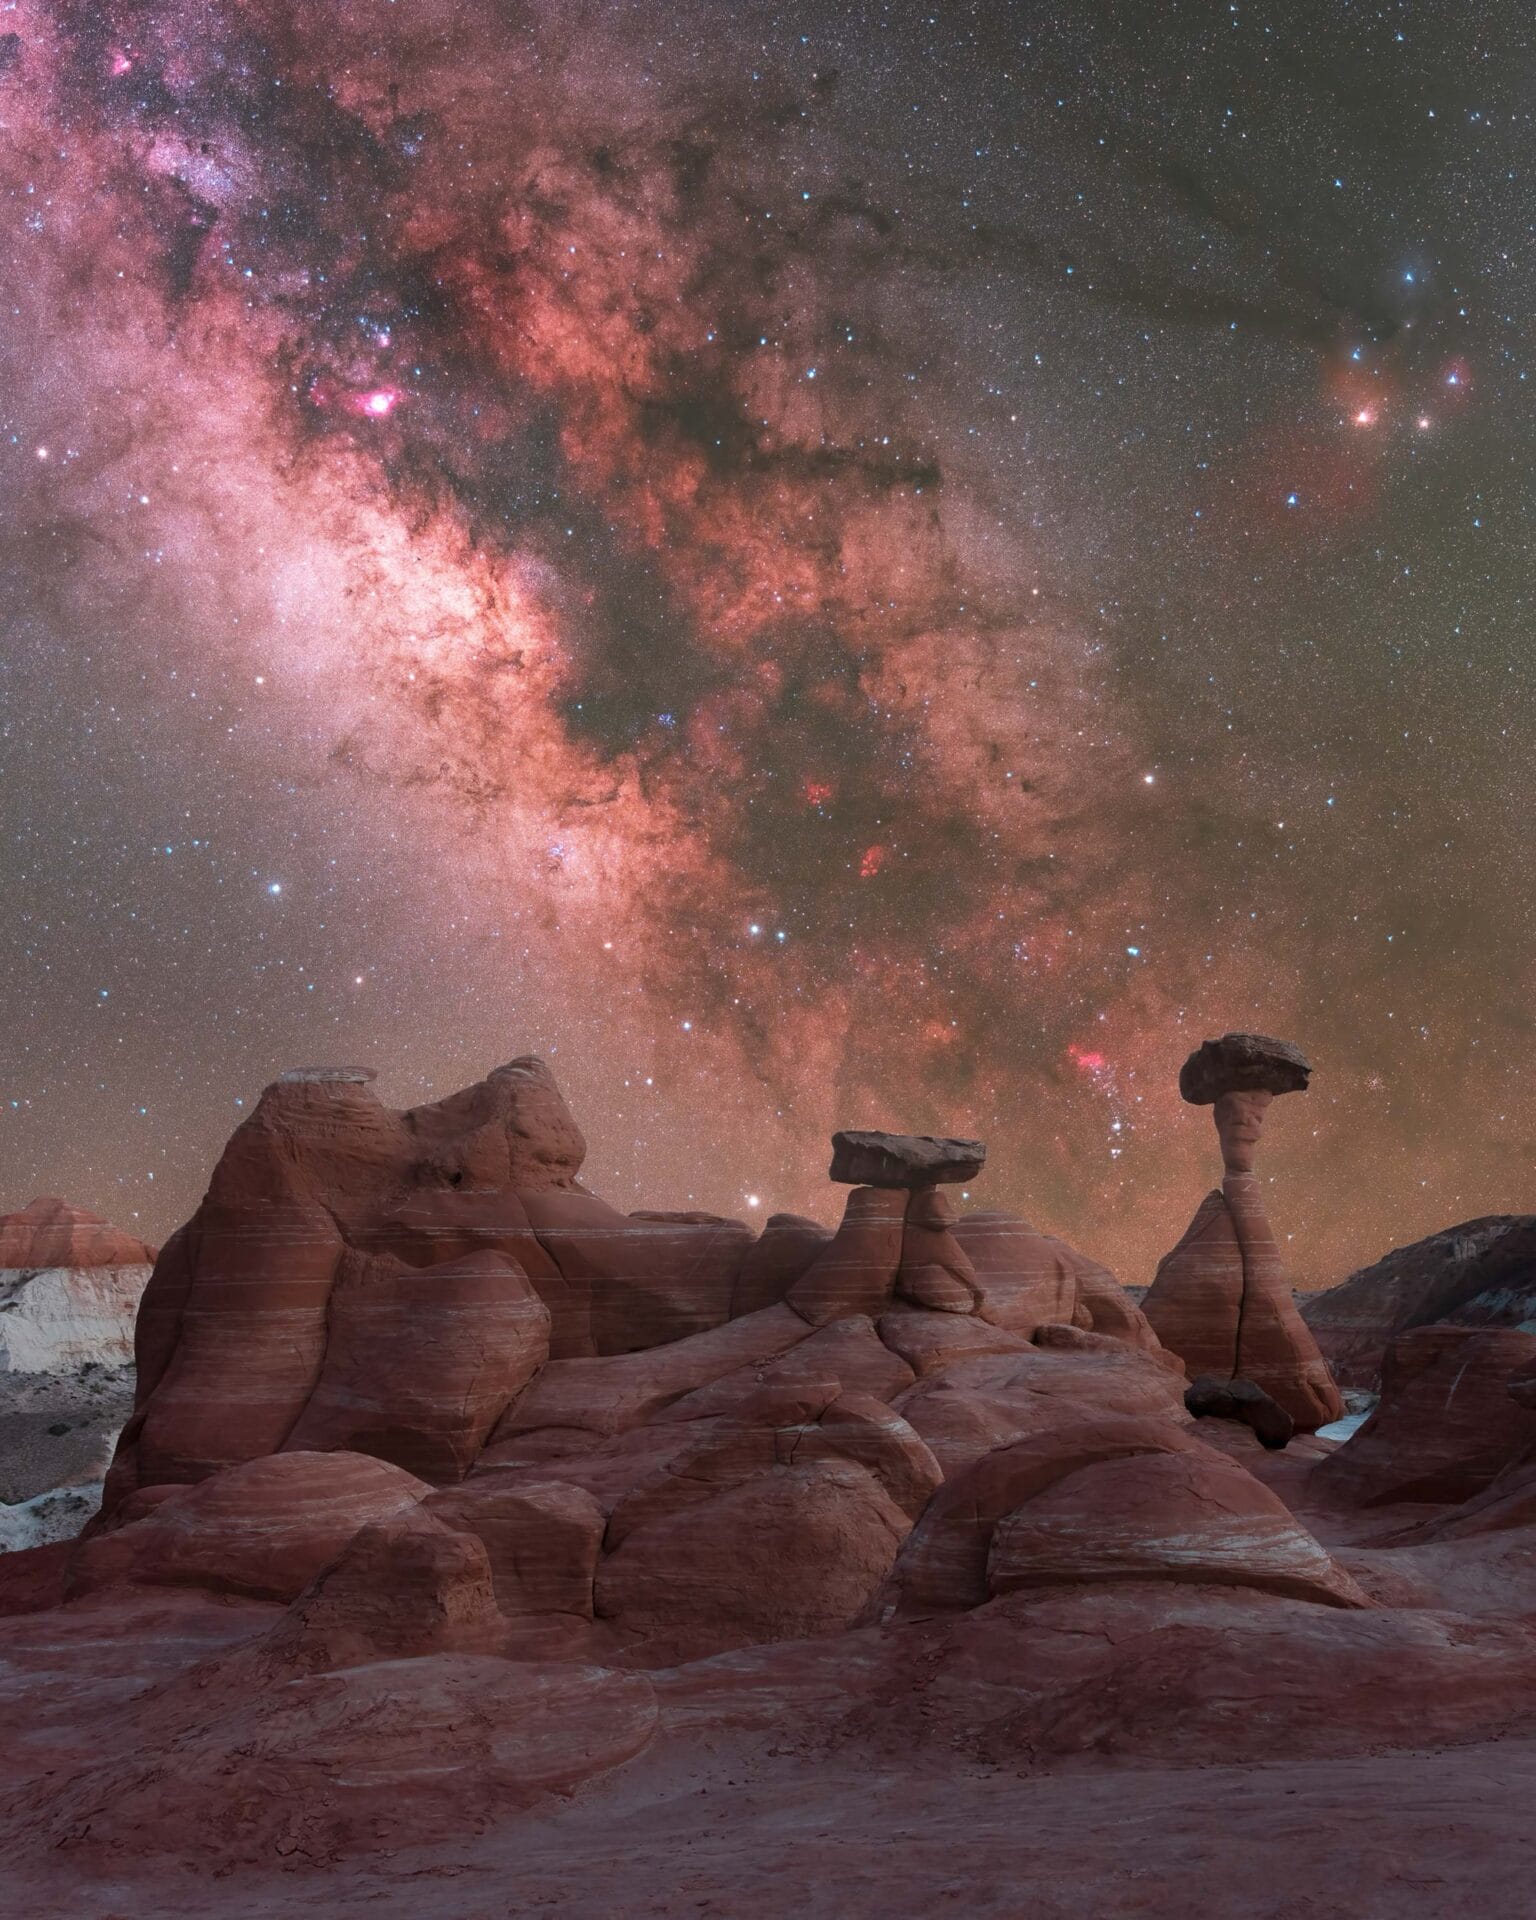 the brilliant star studded milky way above a desert with hoodoos